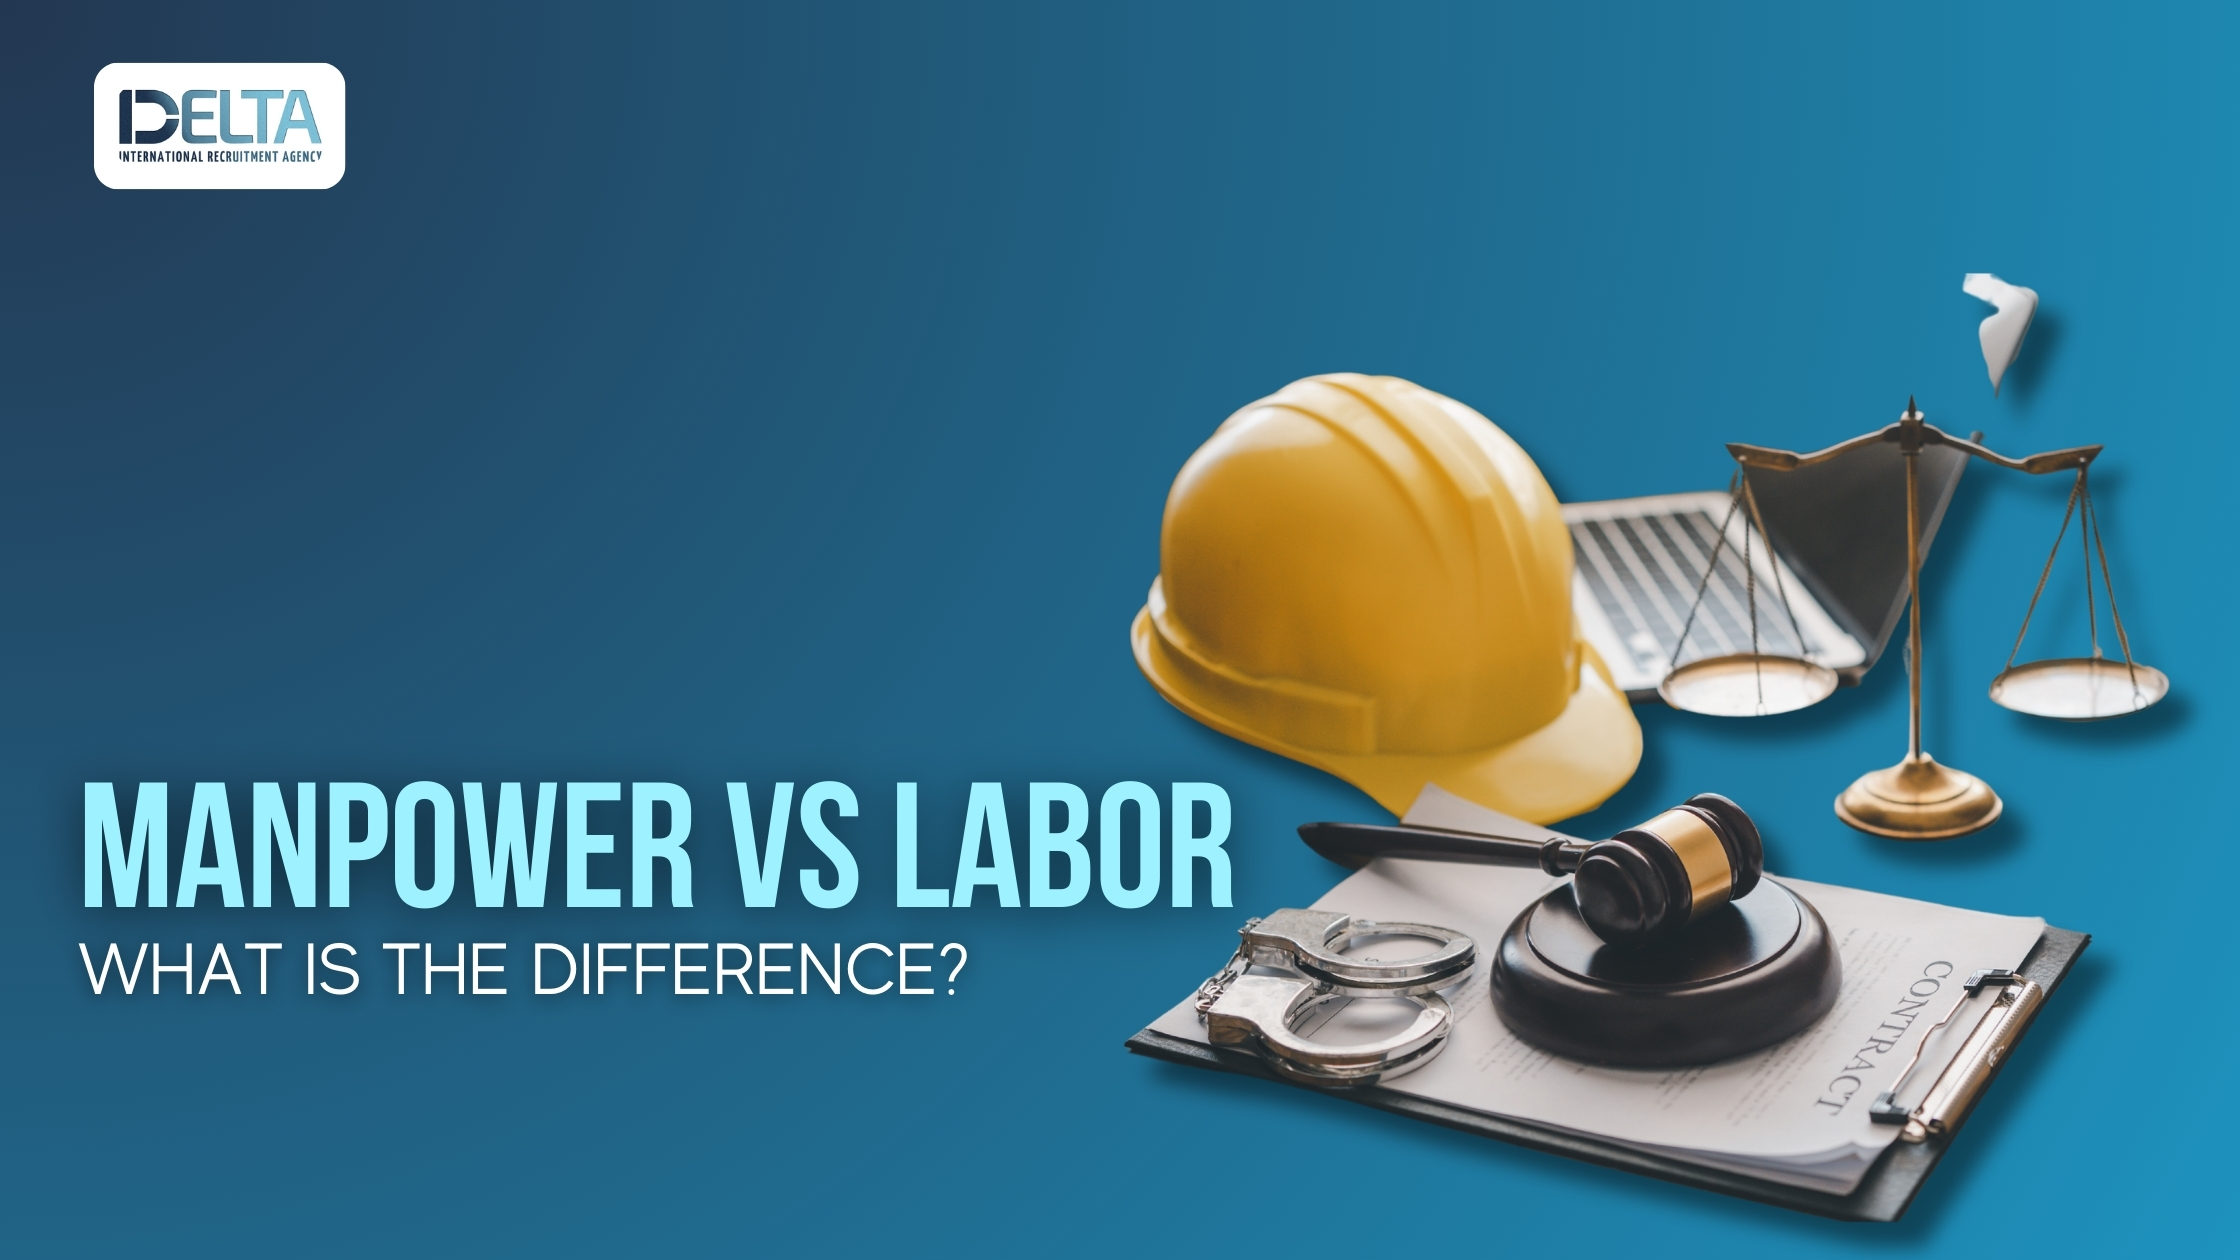 Manpower vs Labor: What is the Difference?